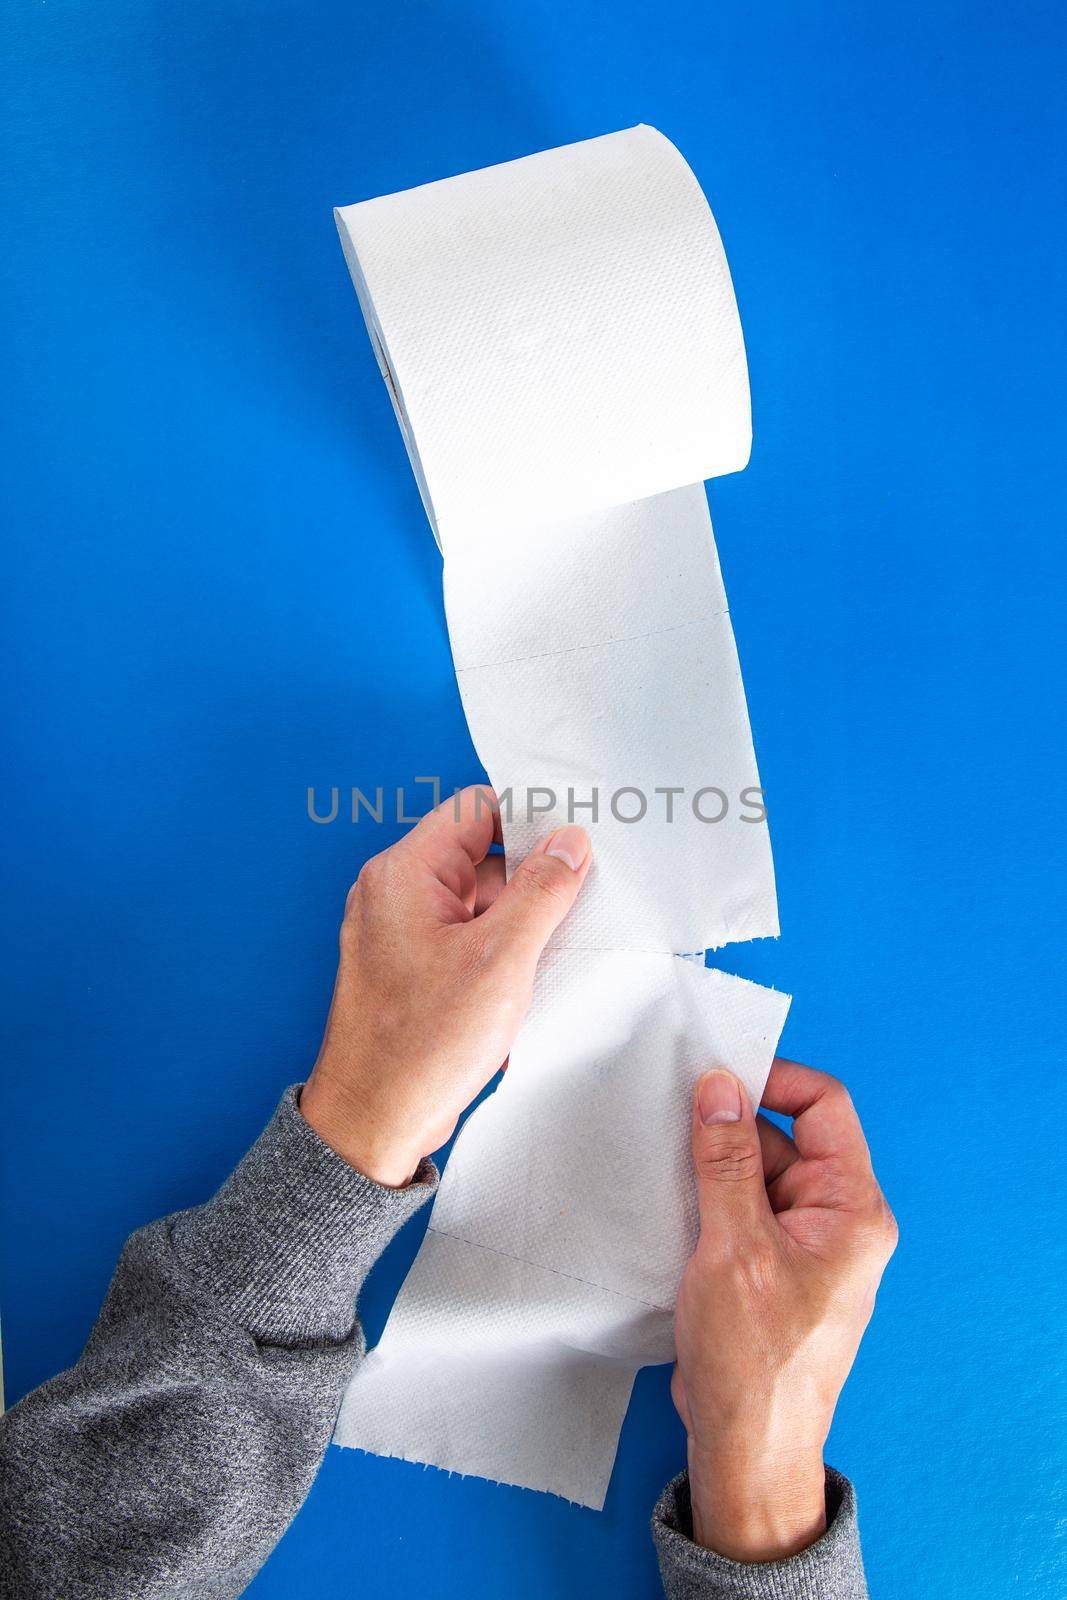 The hand tearing a piece of toilet roll, on the blue background